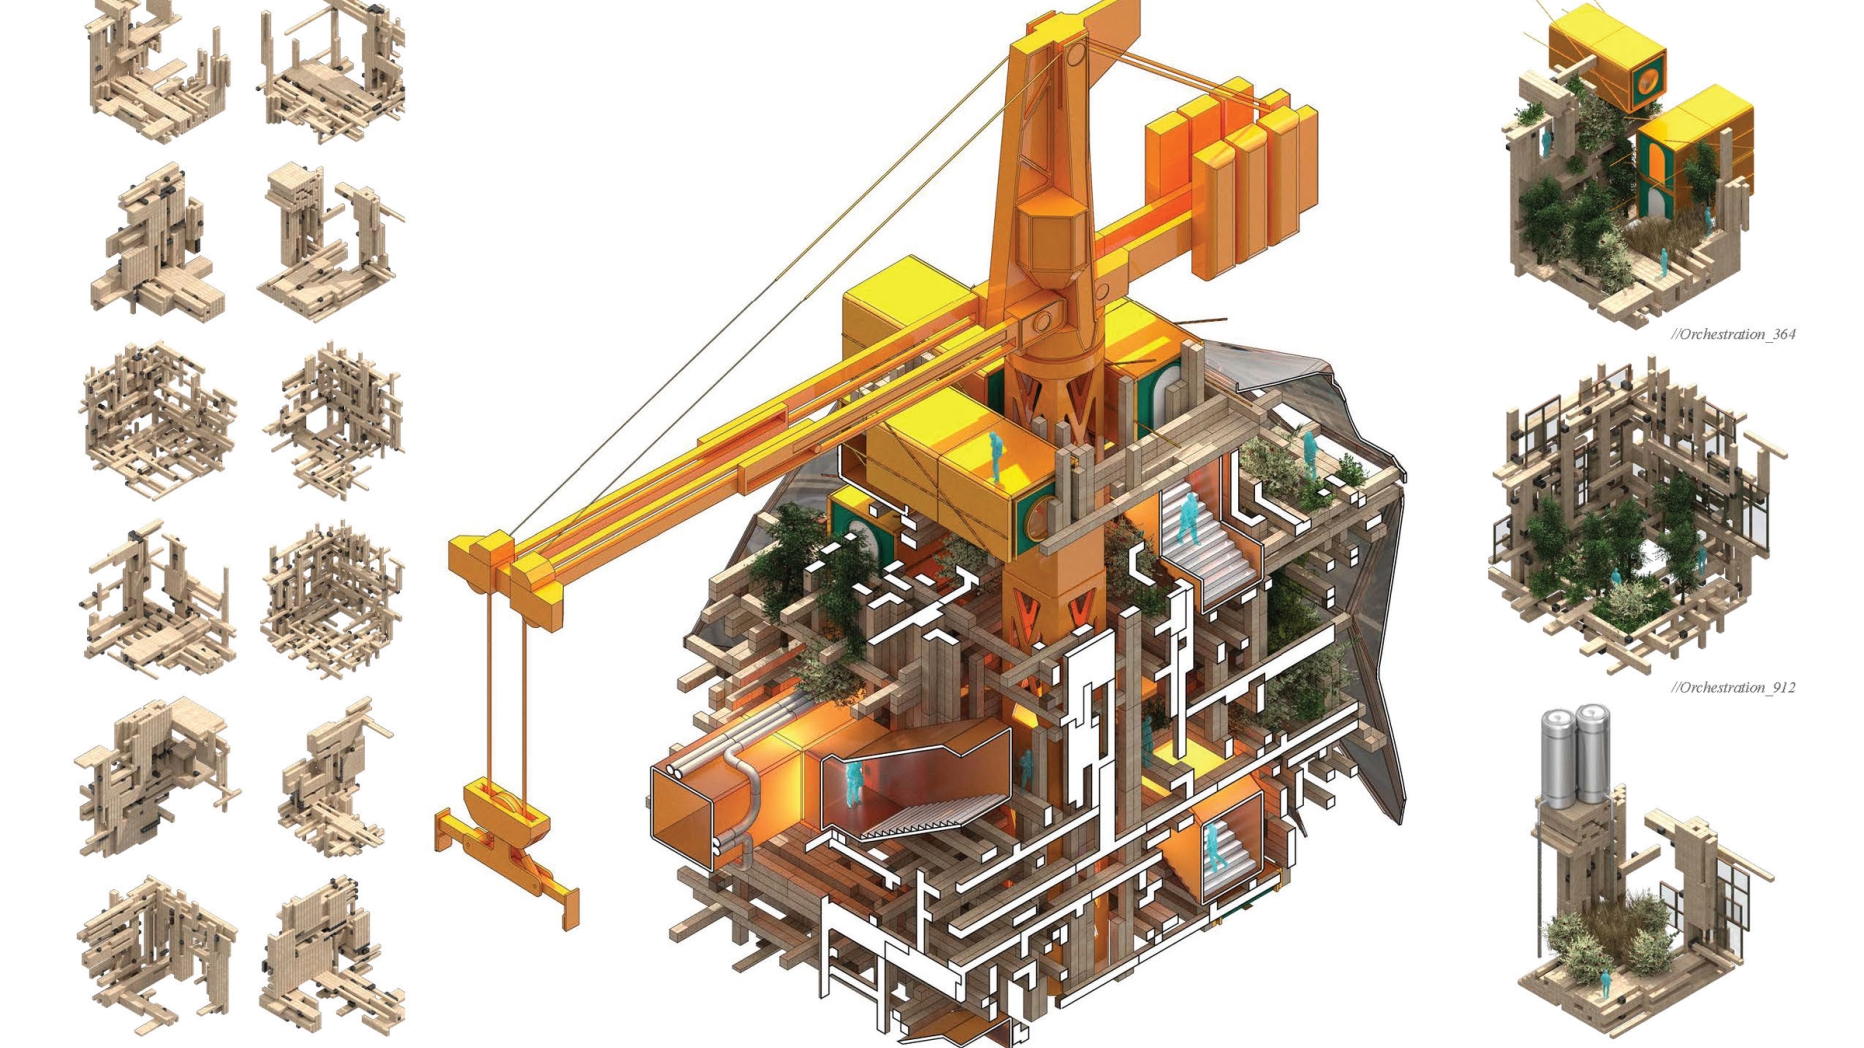 Crane and samples of pipe networks